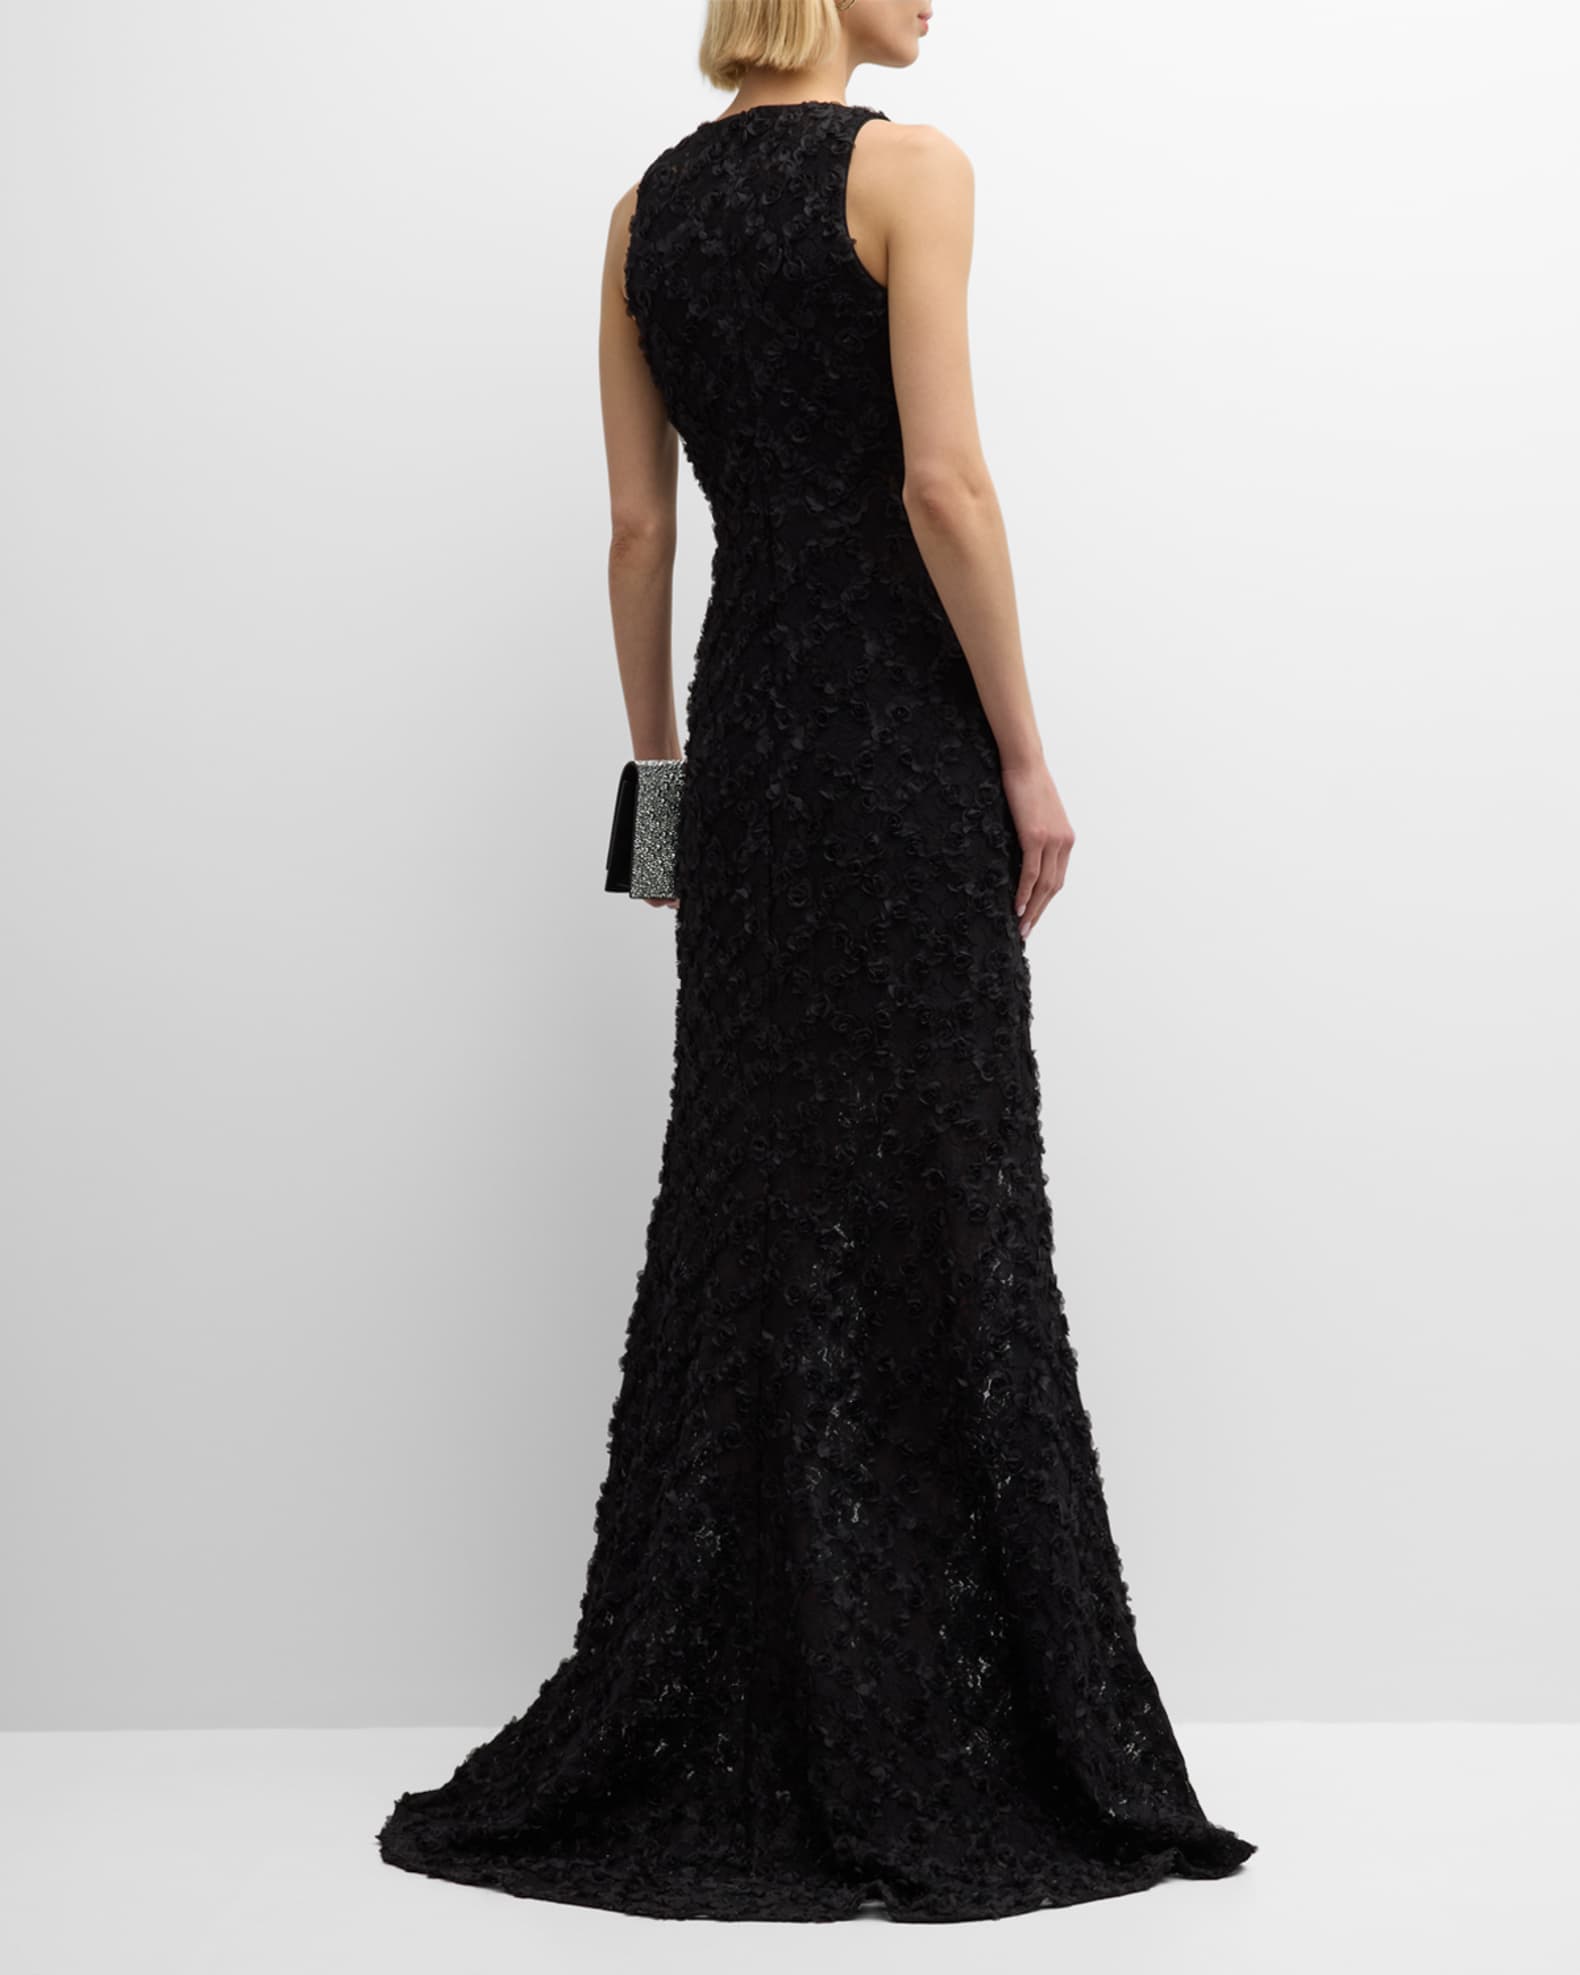 SHO Sleeveless Floral Applique Lace Gown | Neiman Marcus